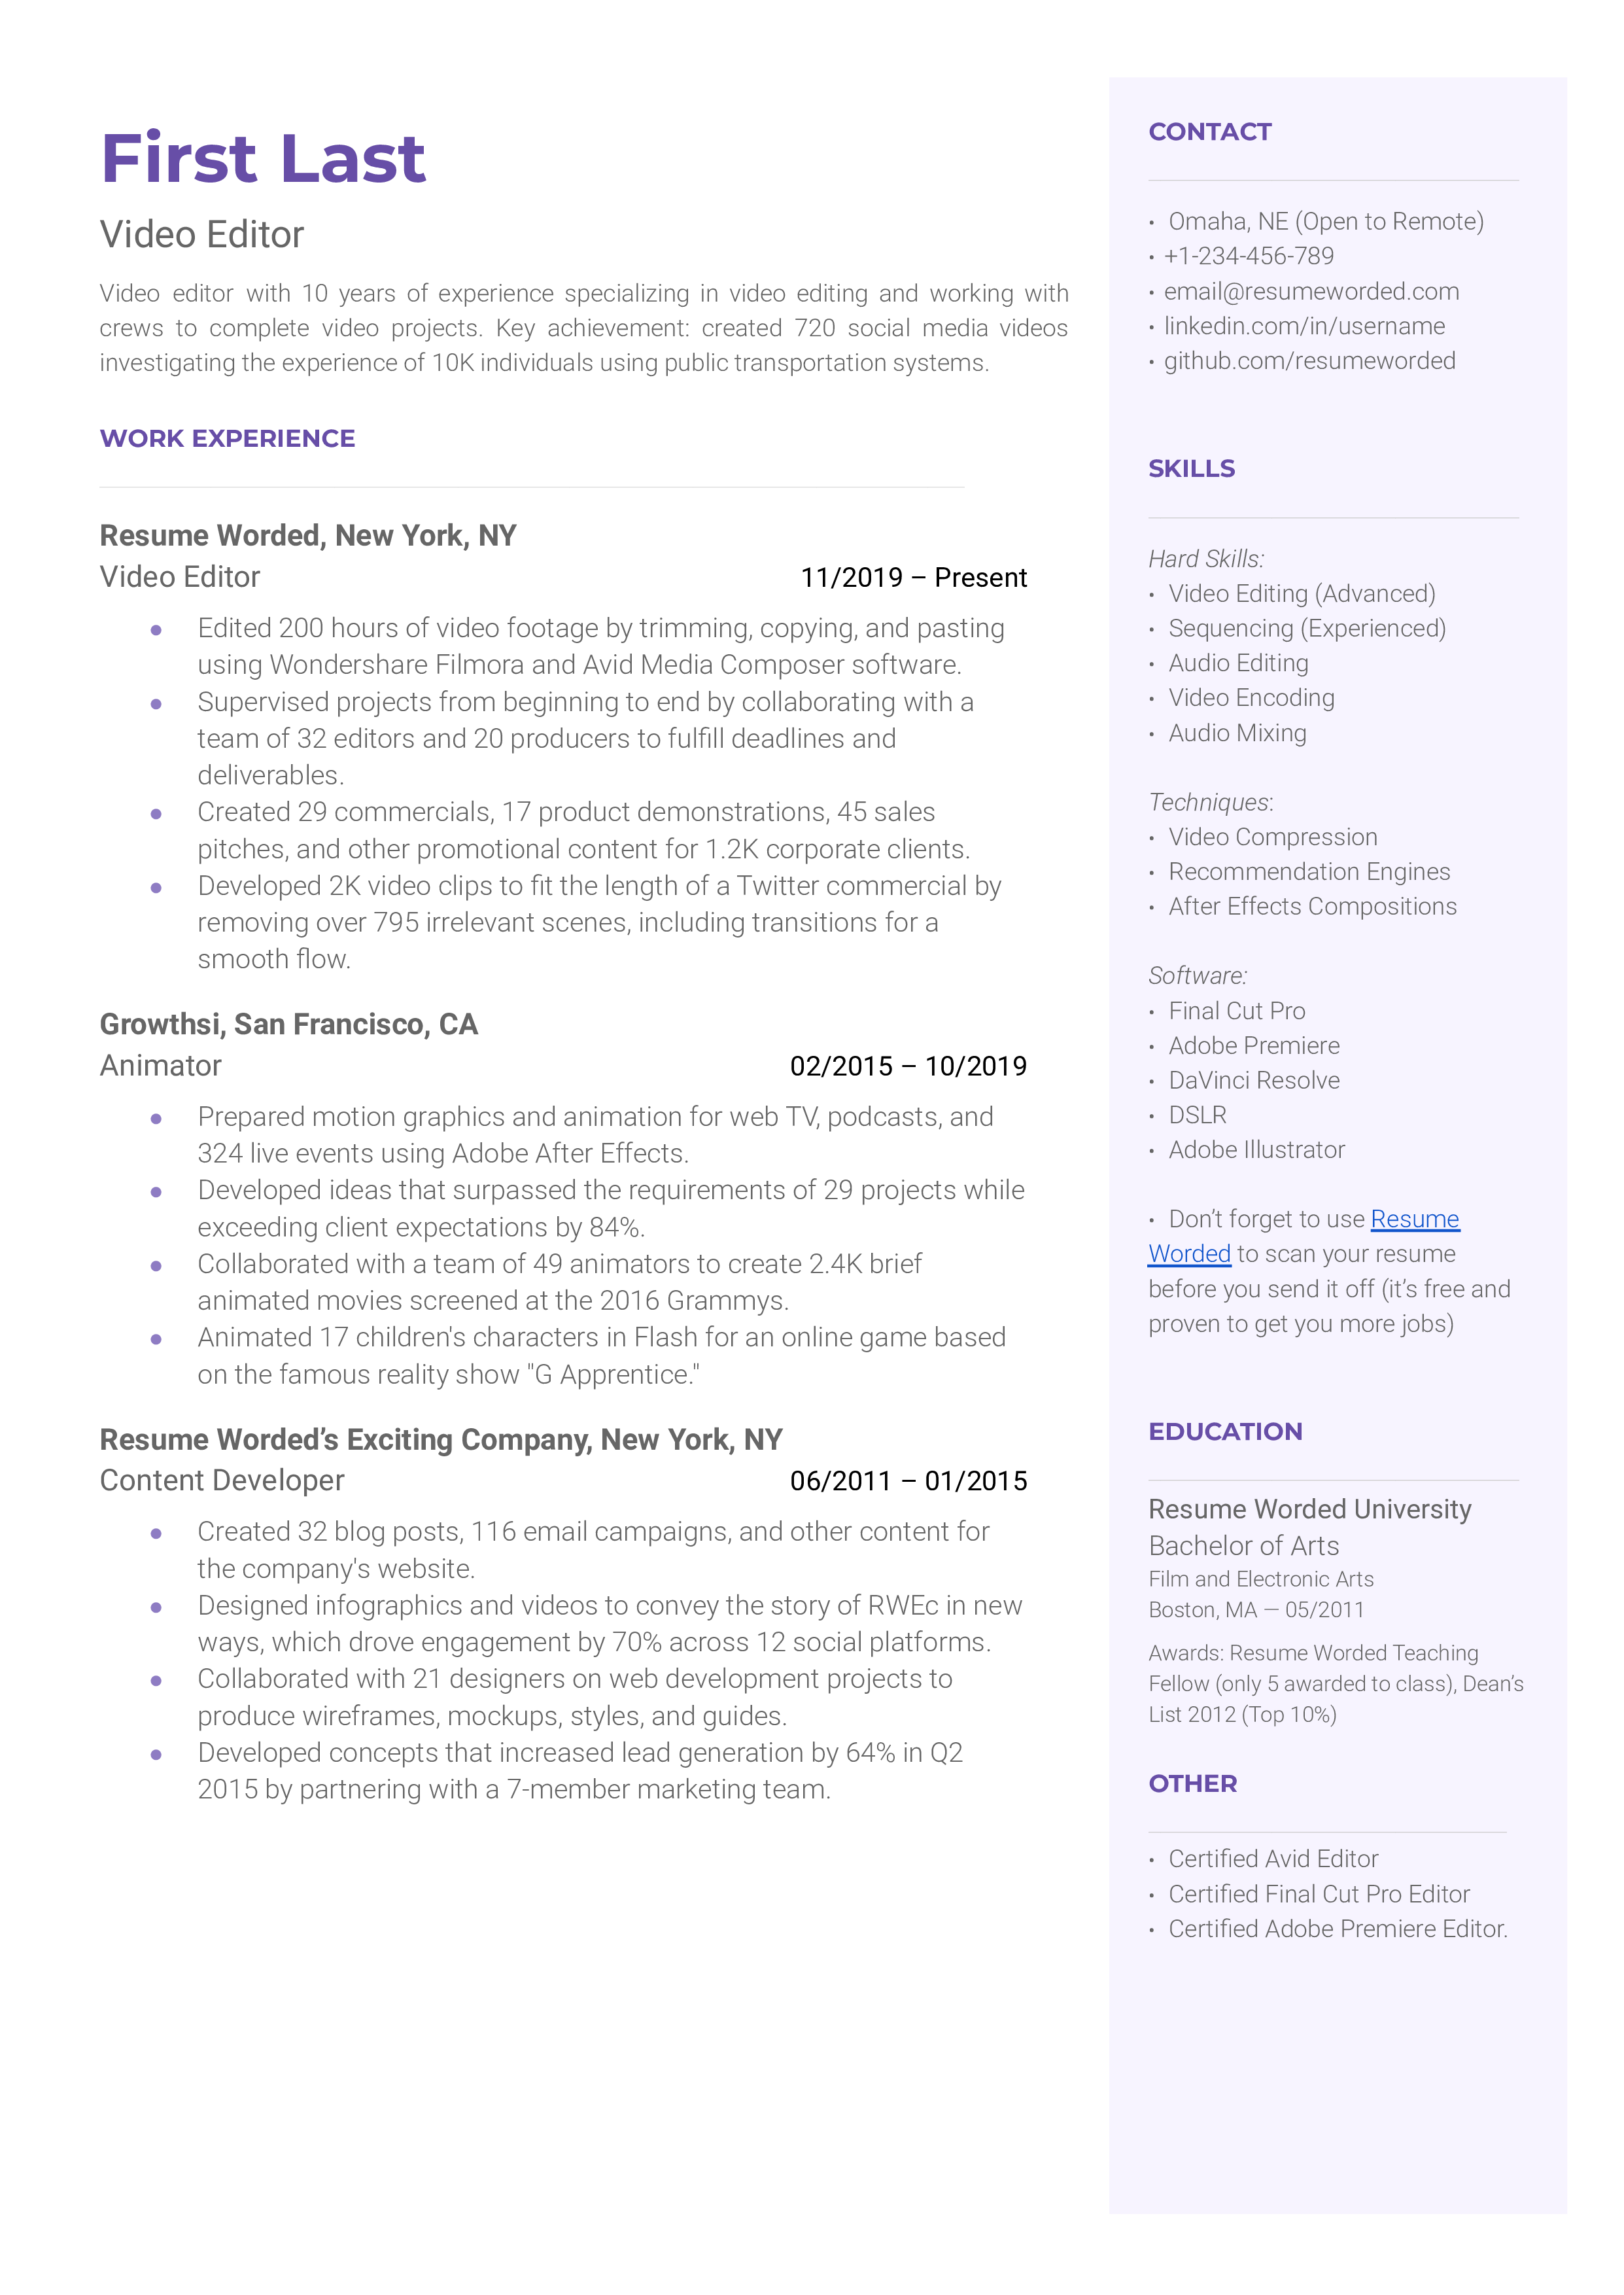 3 Video Editor Resume Examples for 2023 | Resume Worded